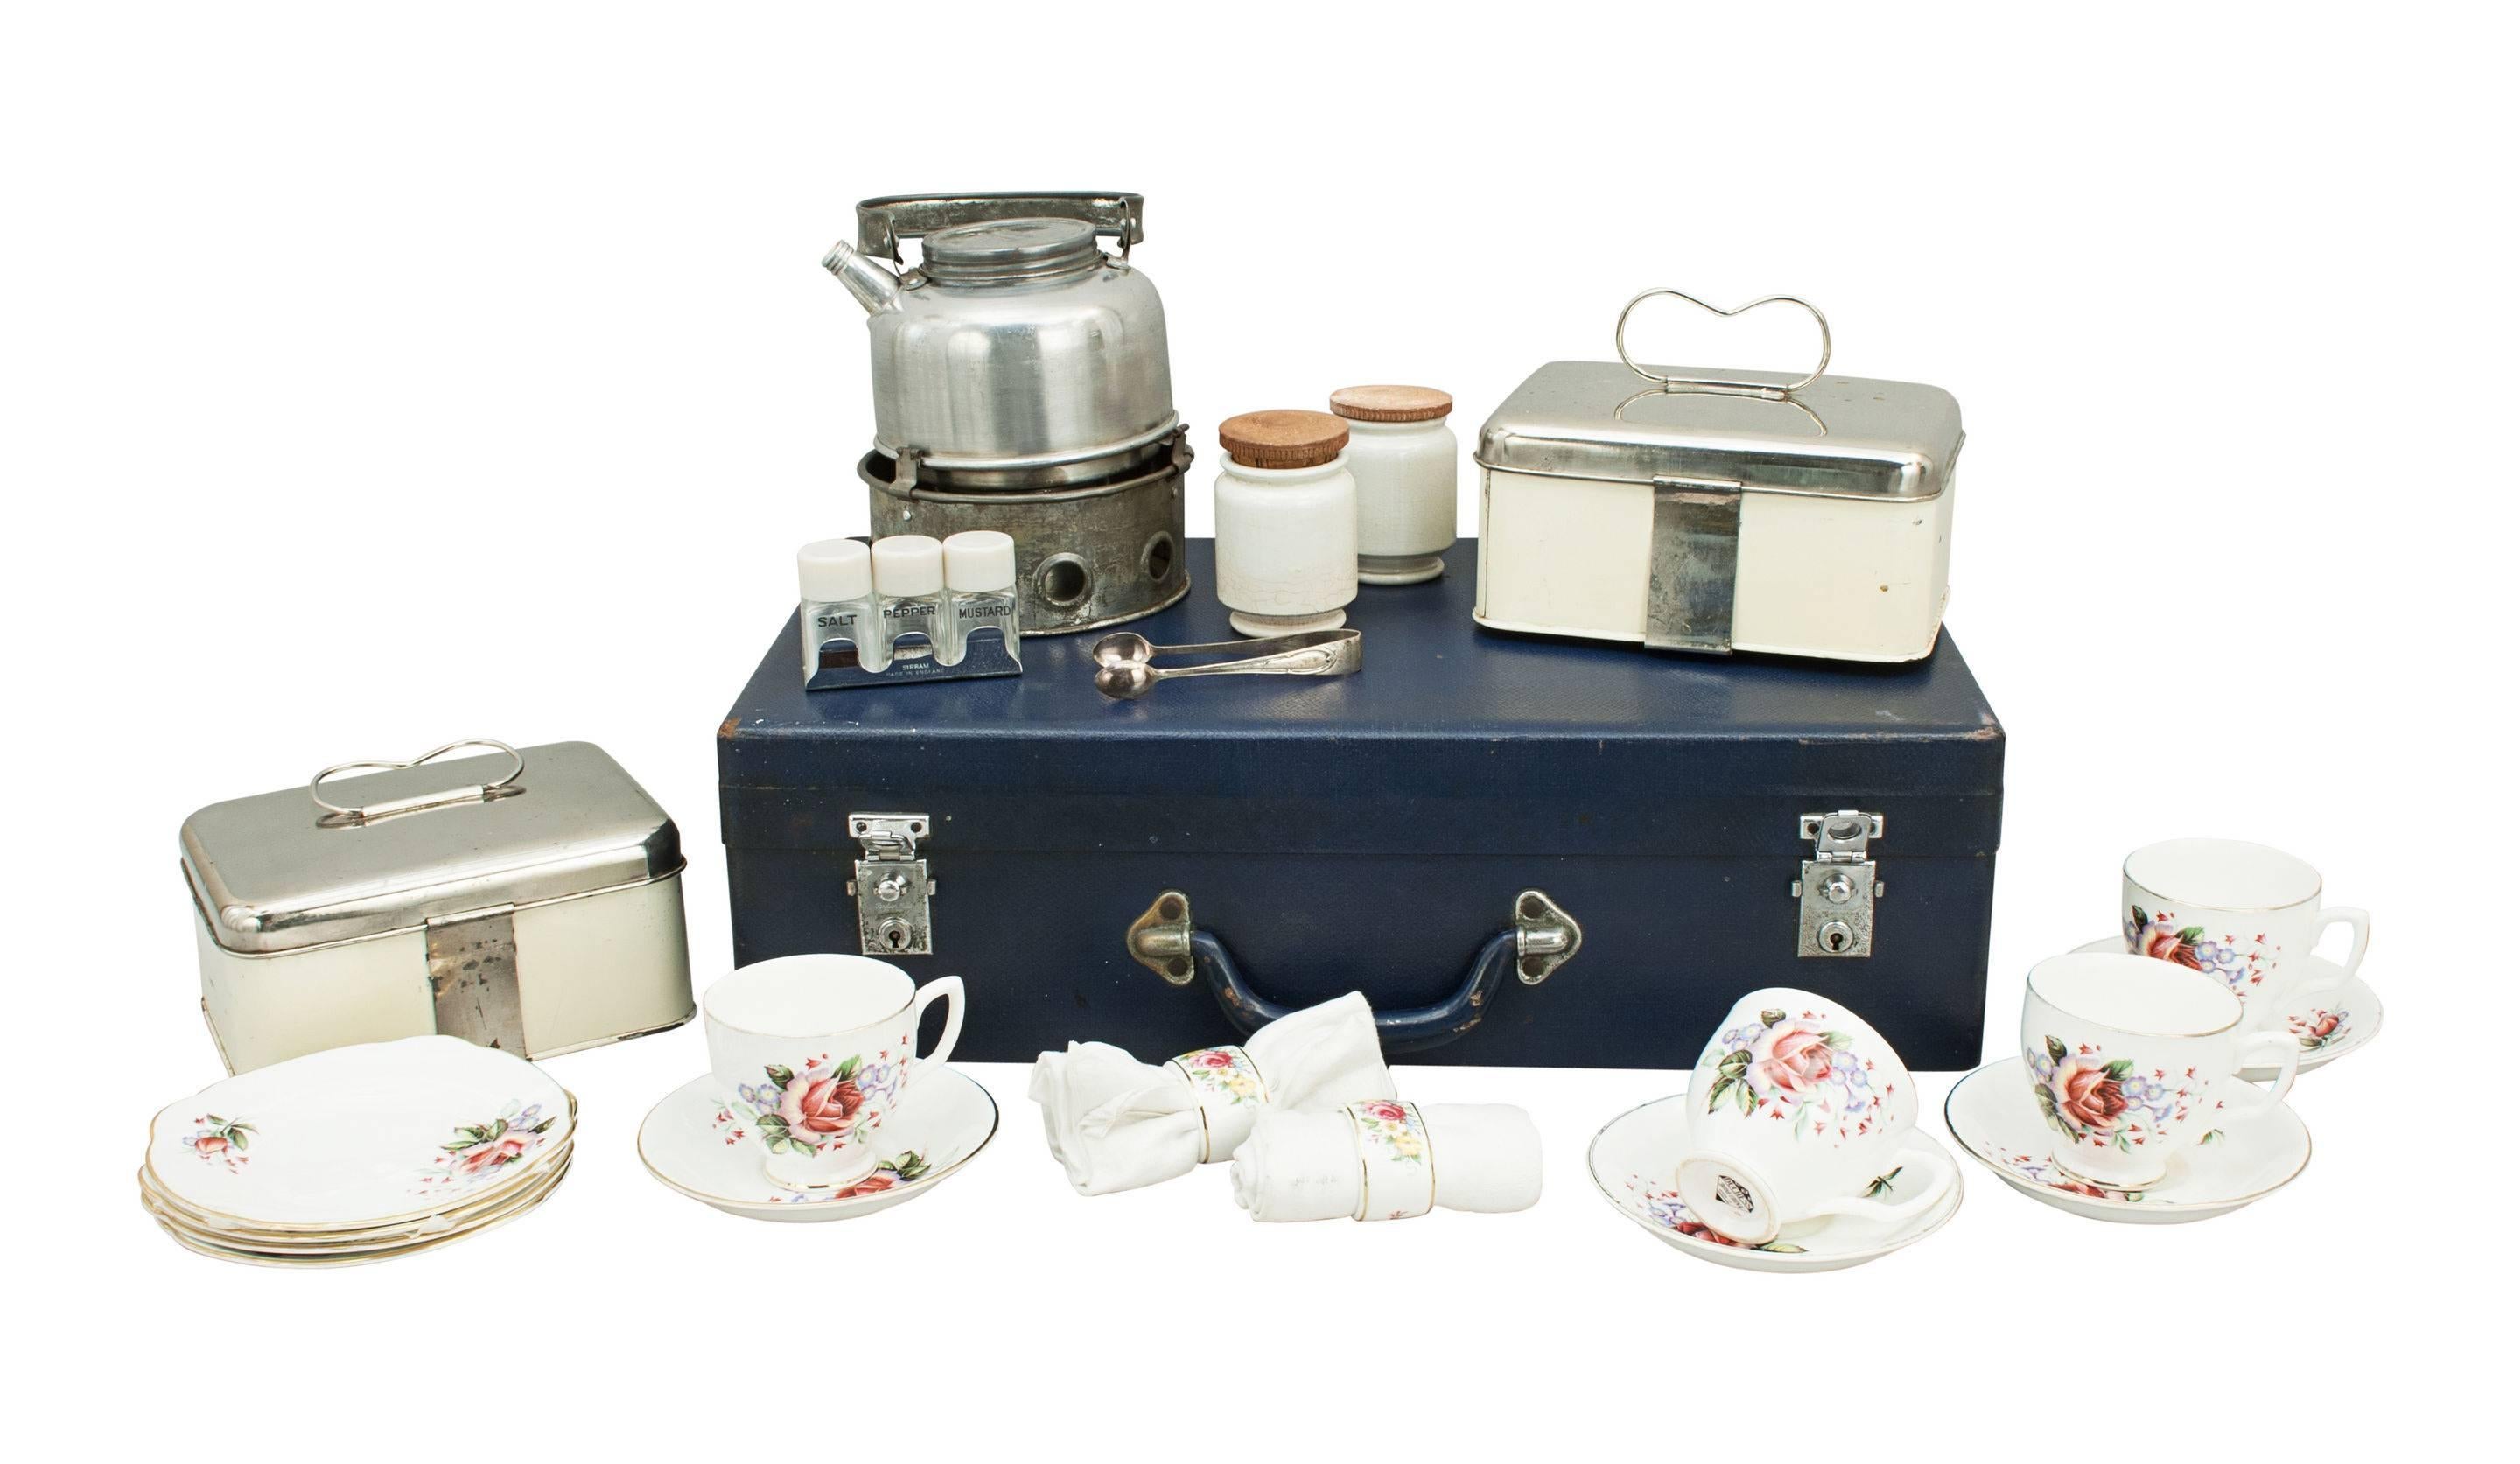 Vintage 'Sirram' picnic set.
A great mid-20th century four-person picnic set in a carry case. The case is covered in blue cloth with two nickel-plated locks and catches, the contents in a good neat compact setting, held in place in the lid by